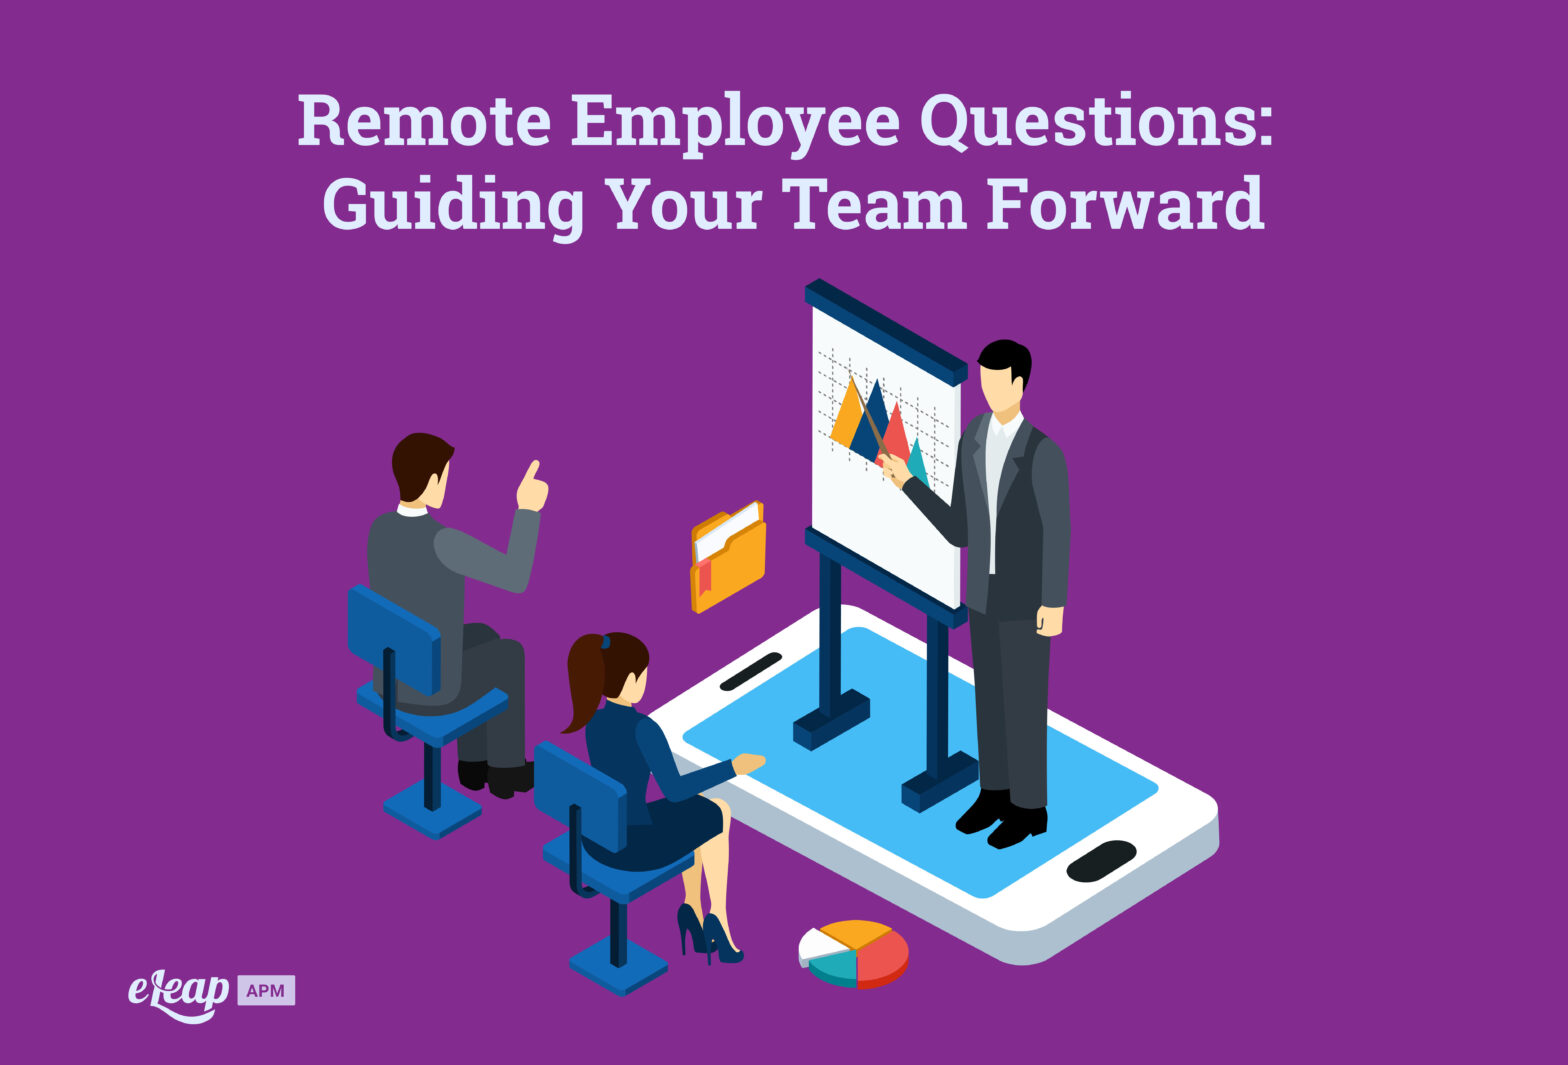 Remote Employee Questions: Guiding Your Team Forward